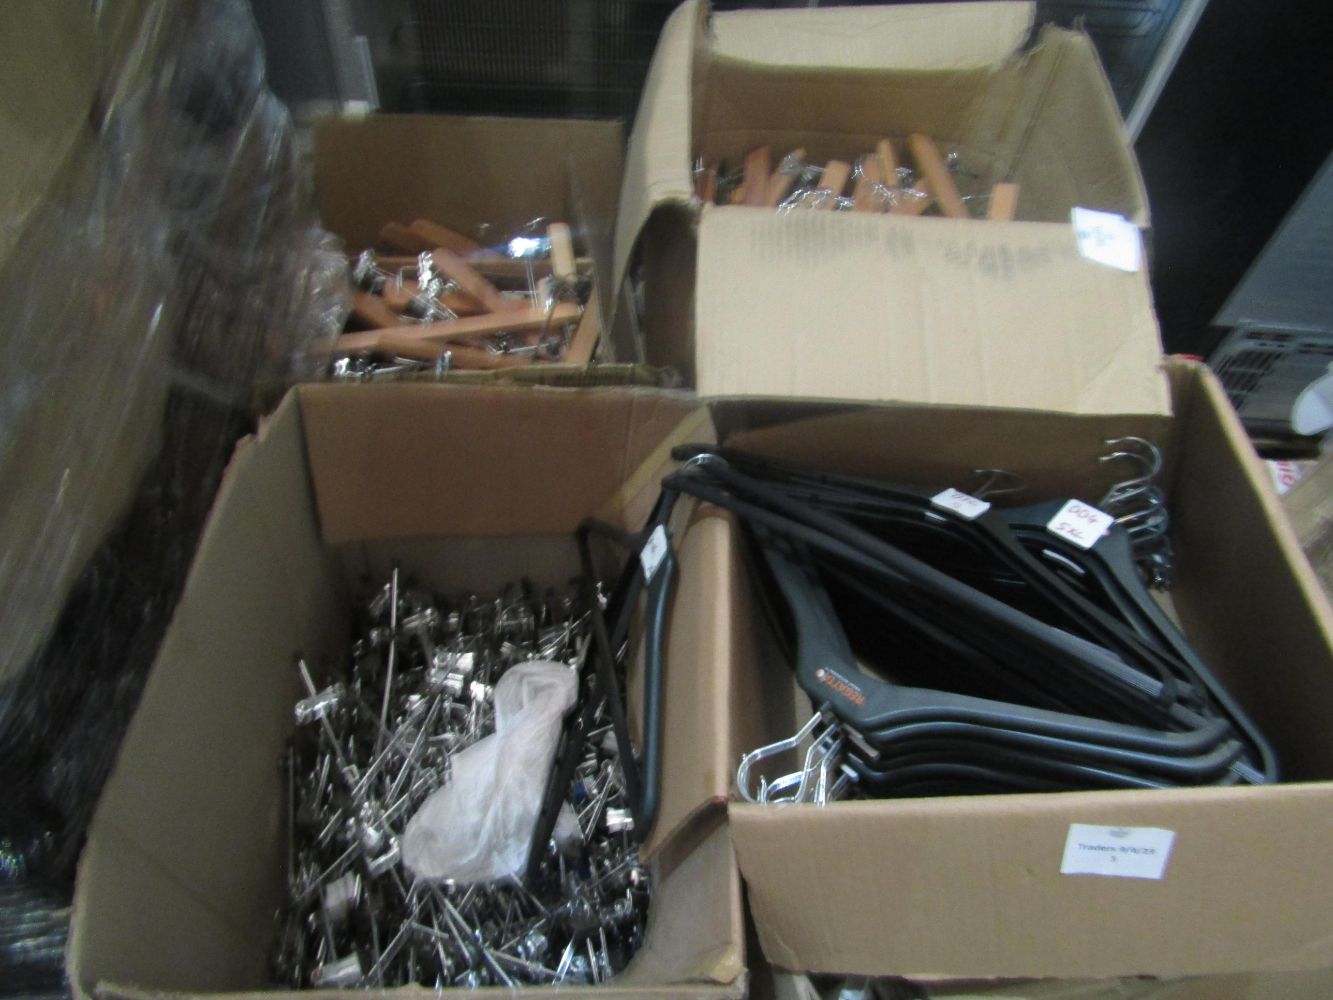 Pallet of new and customer returns stock including fitness, Smashed TV's, Phone accessories and more